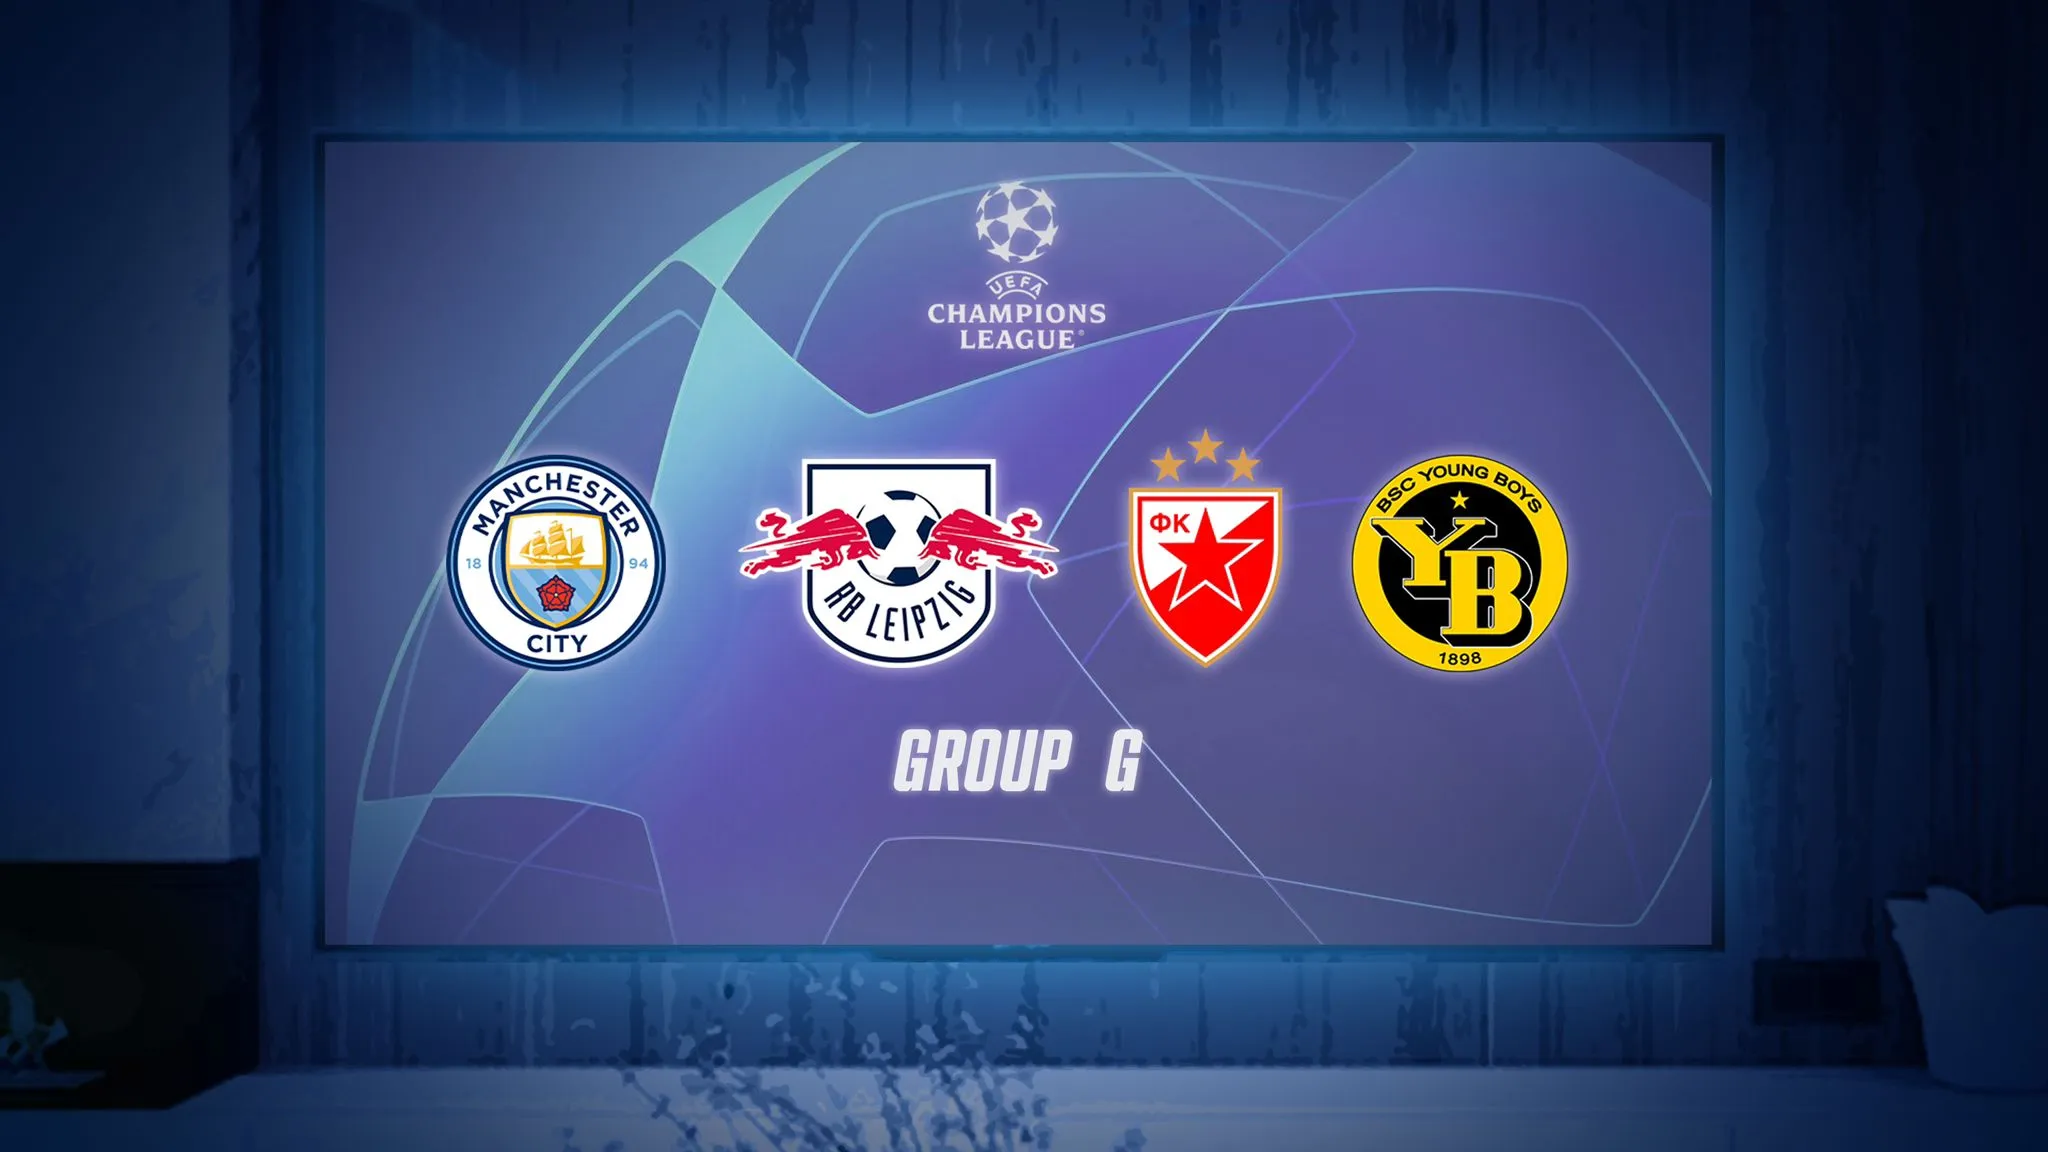 RBL’s opponents in the Champions League group stages